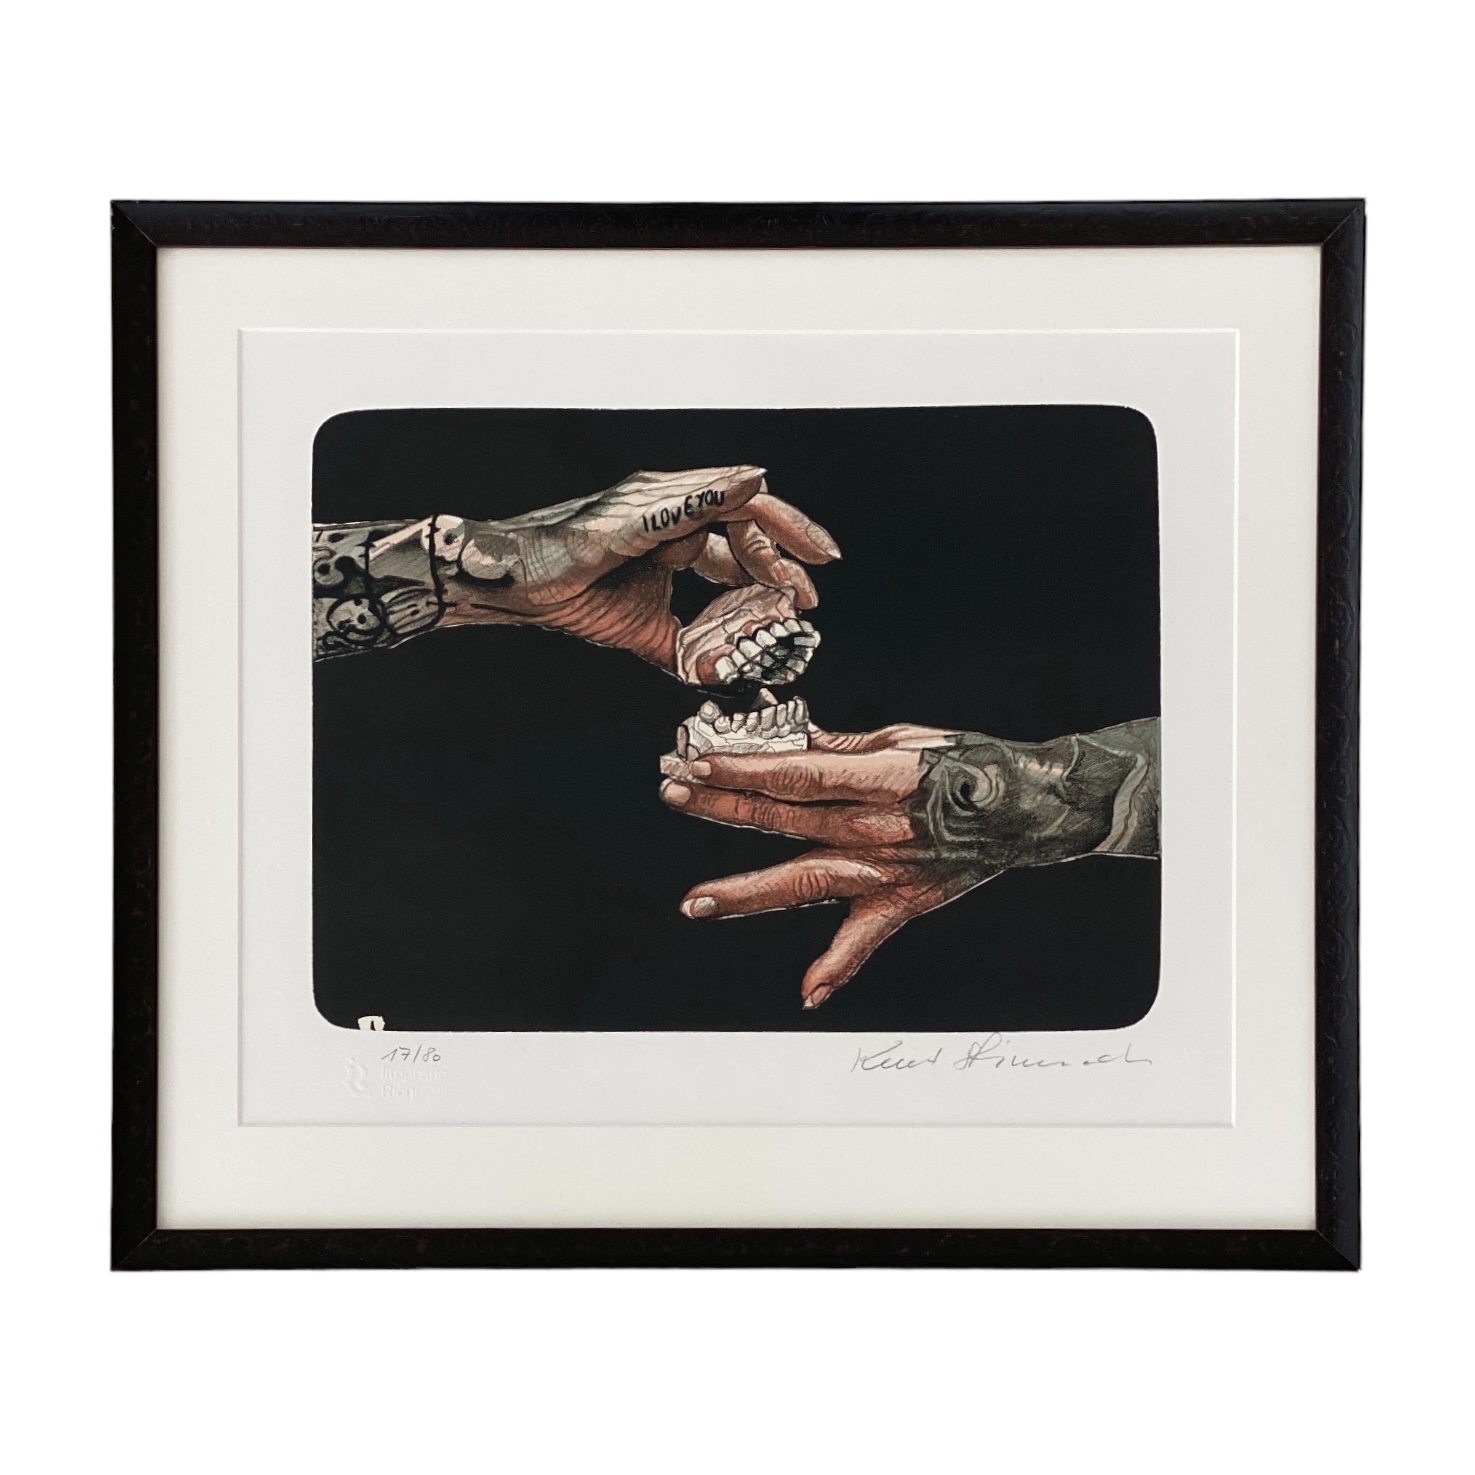 Kurt Stimmeder, Talking Hands, 46 x 35 cm, Lithography - 8 printing layers on 250 gr EXCUDIT paper - Edition 17-80, 2022